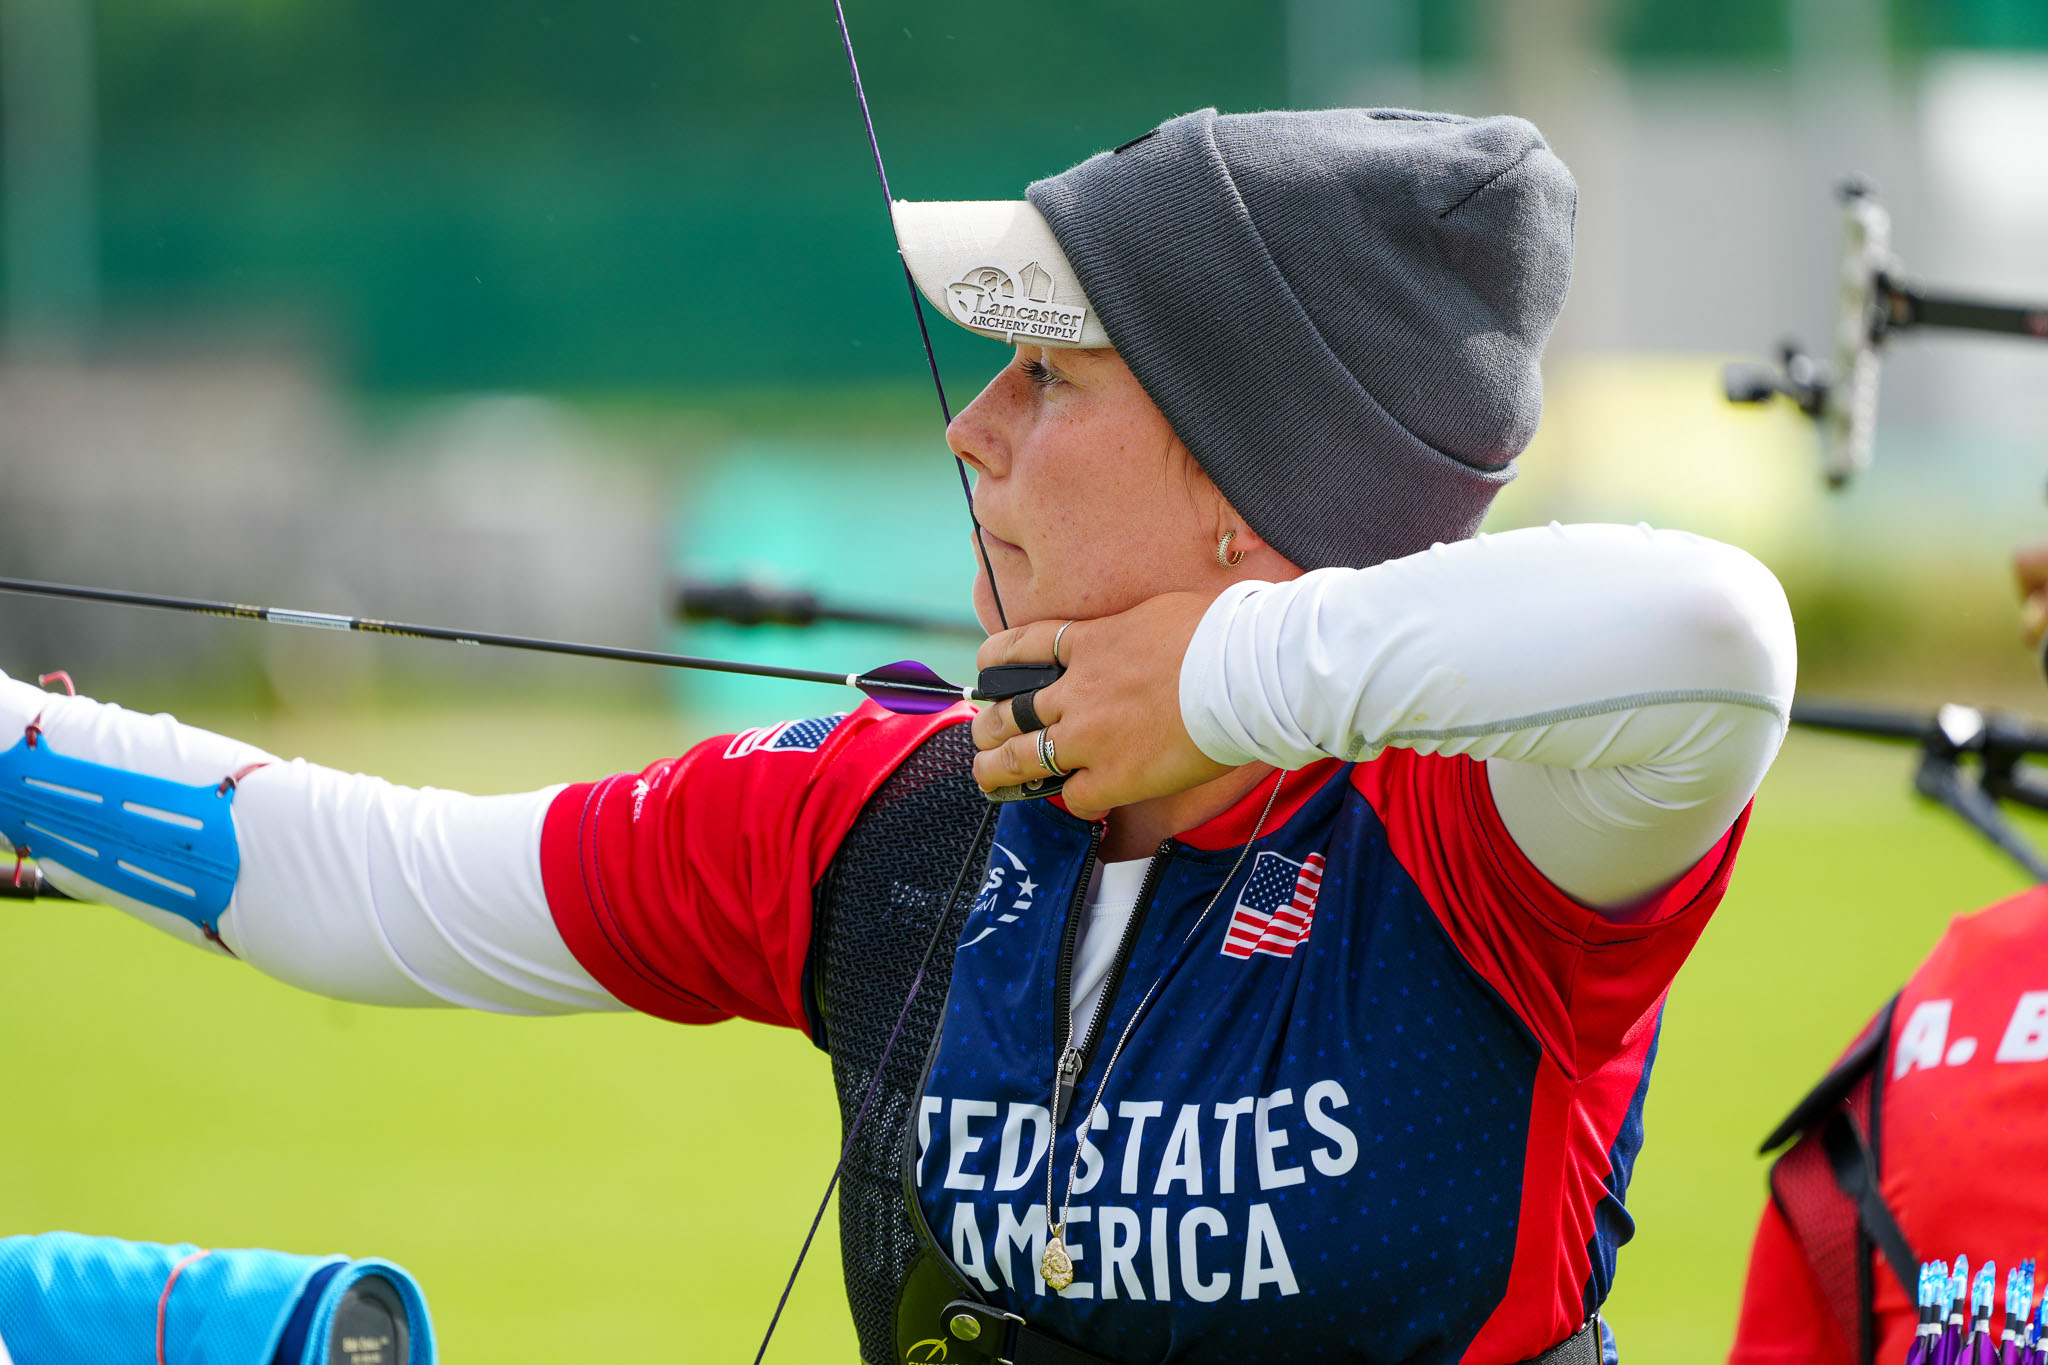 Day one of the World Archery Youth Championships proves testing but